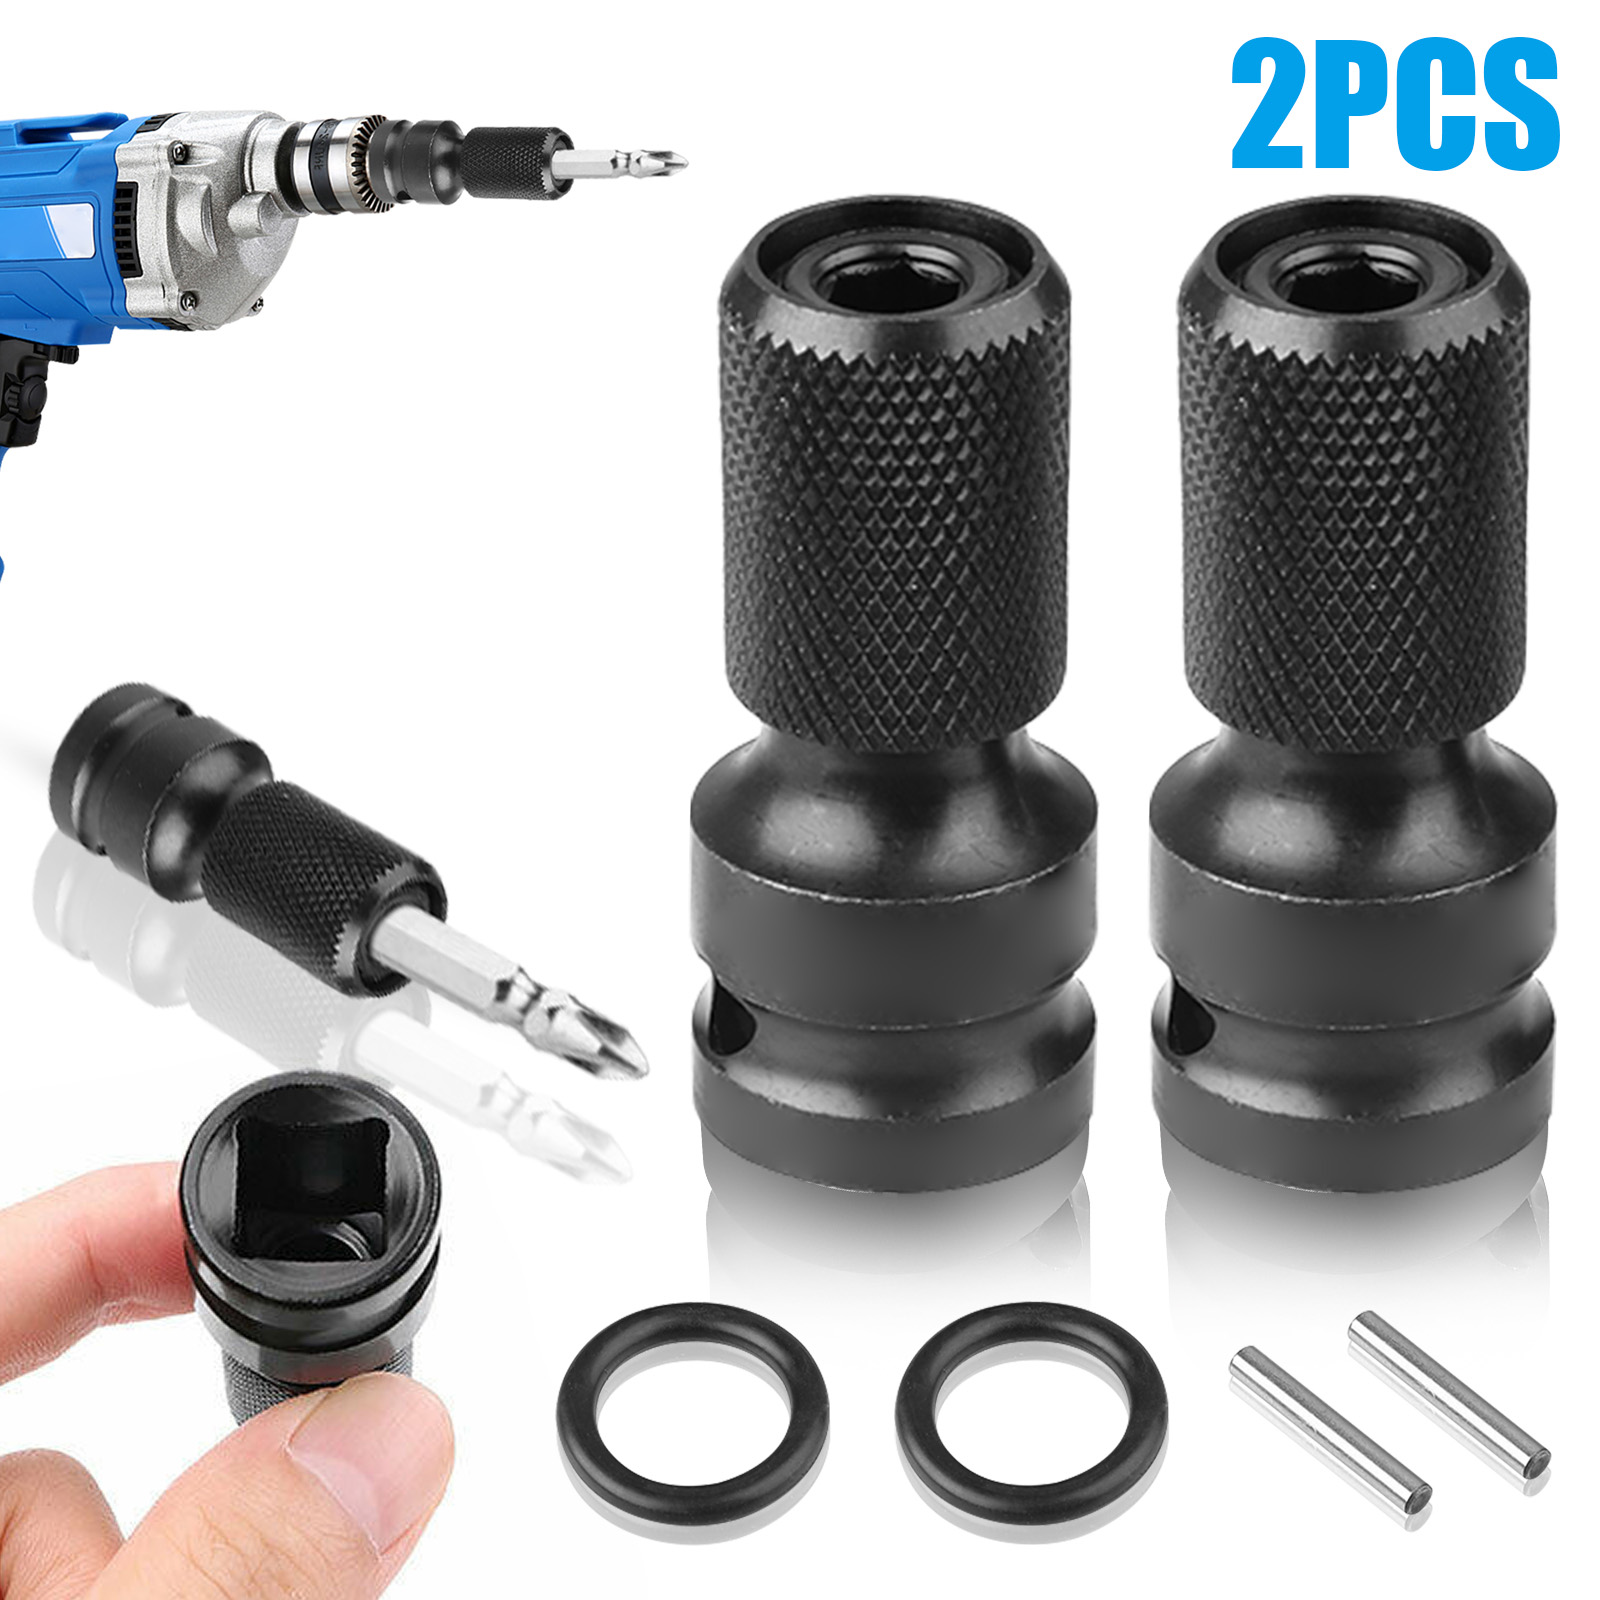 1/2'' Drive Hex Drill Chuck Converter Adapter Socket For Impact Wrench 